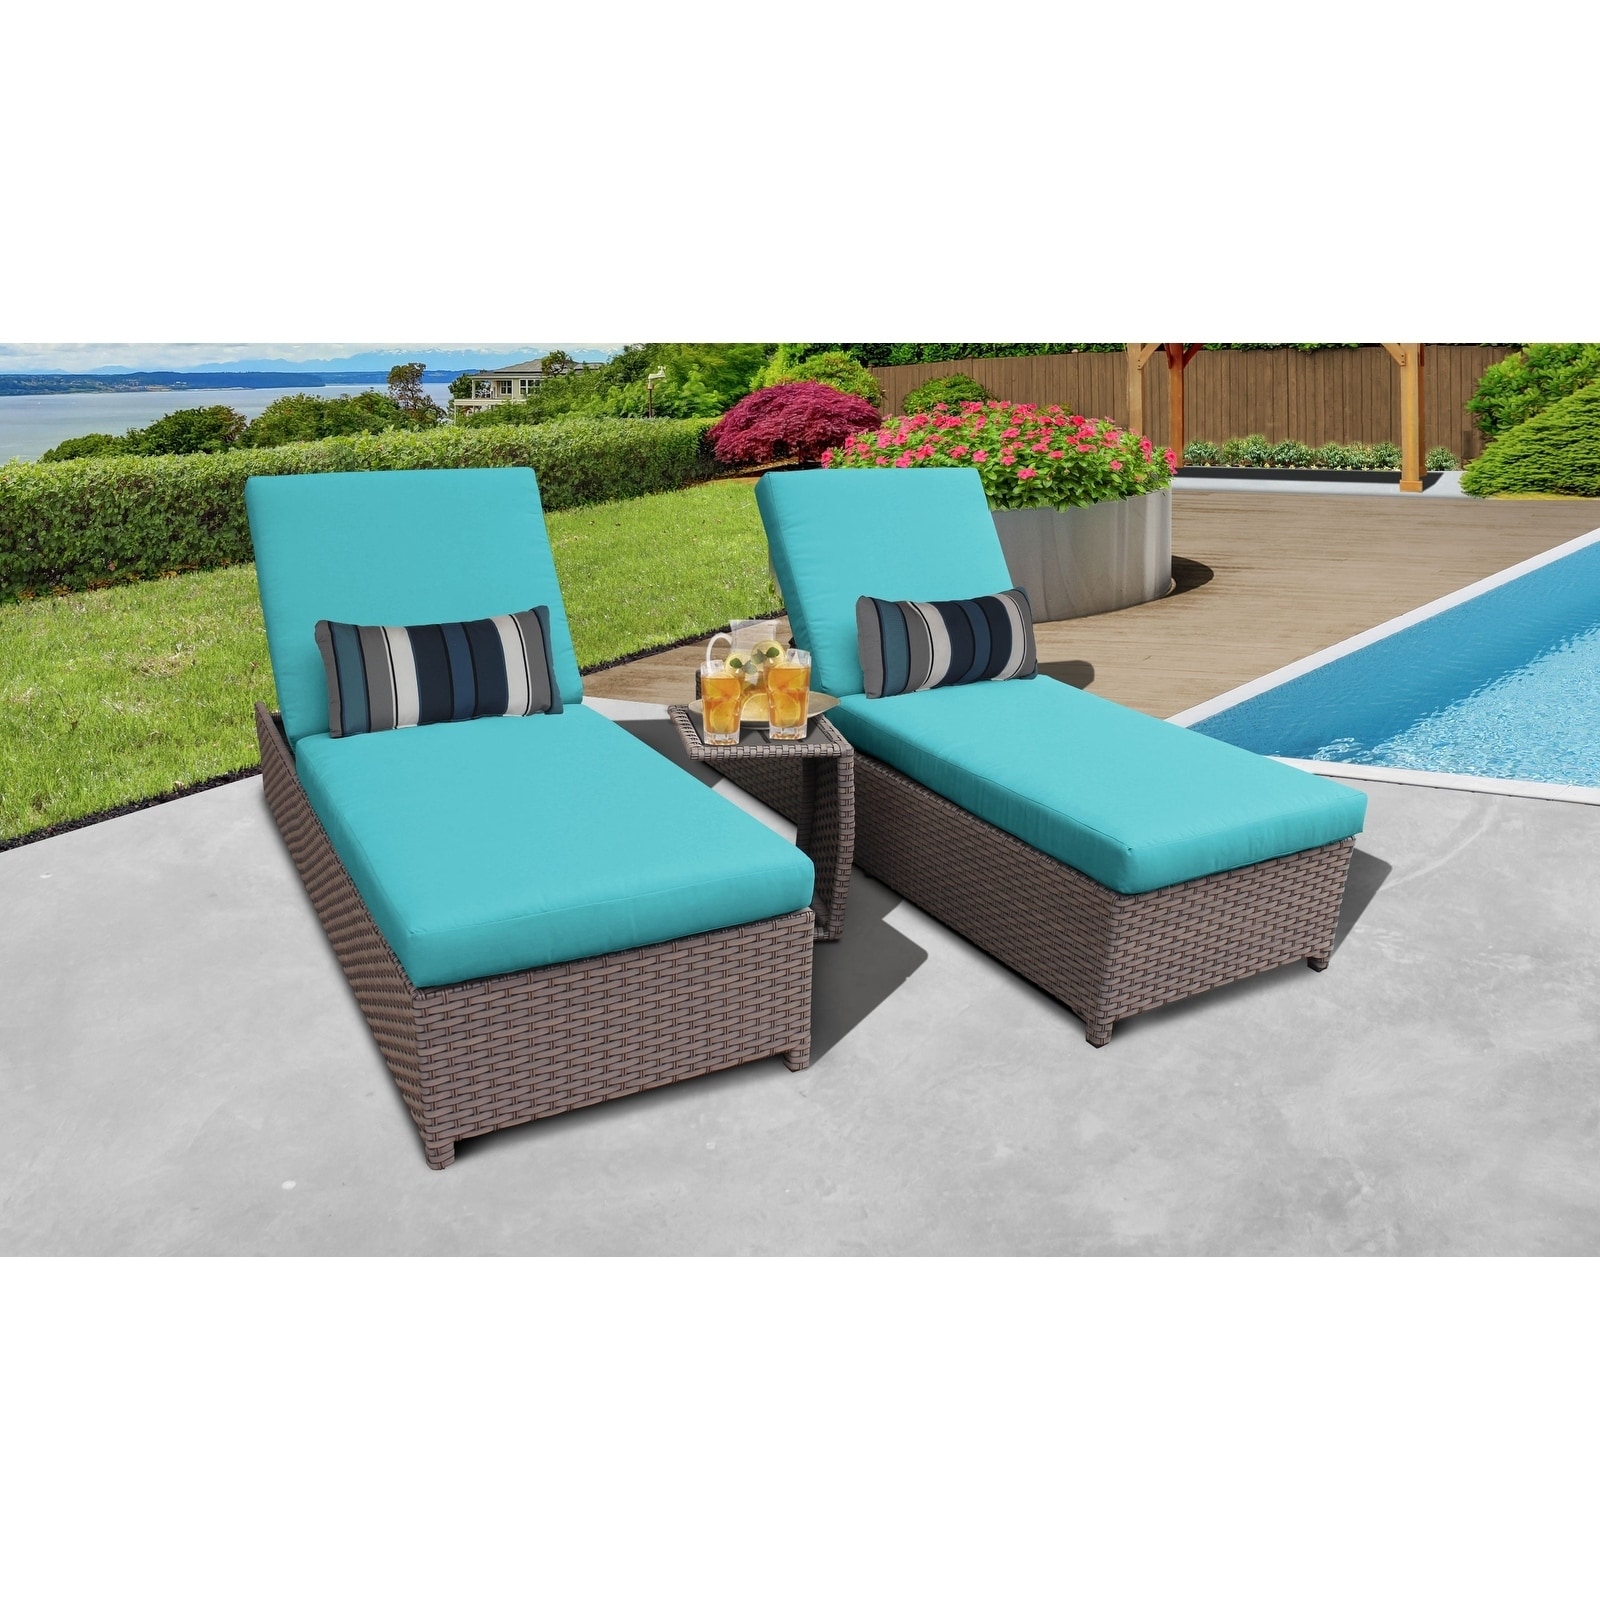 Florence Wheeled Chaise Set Of 2 Outdoor Wicker Patio Furniture And Side Table